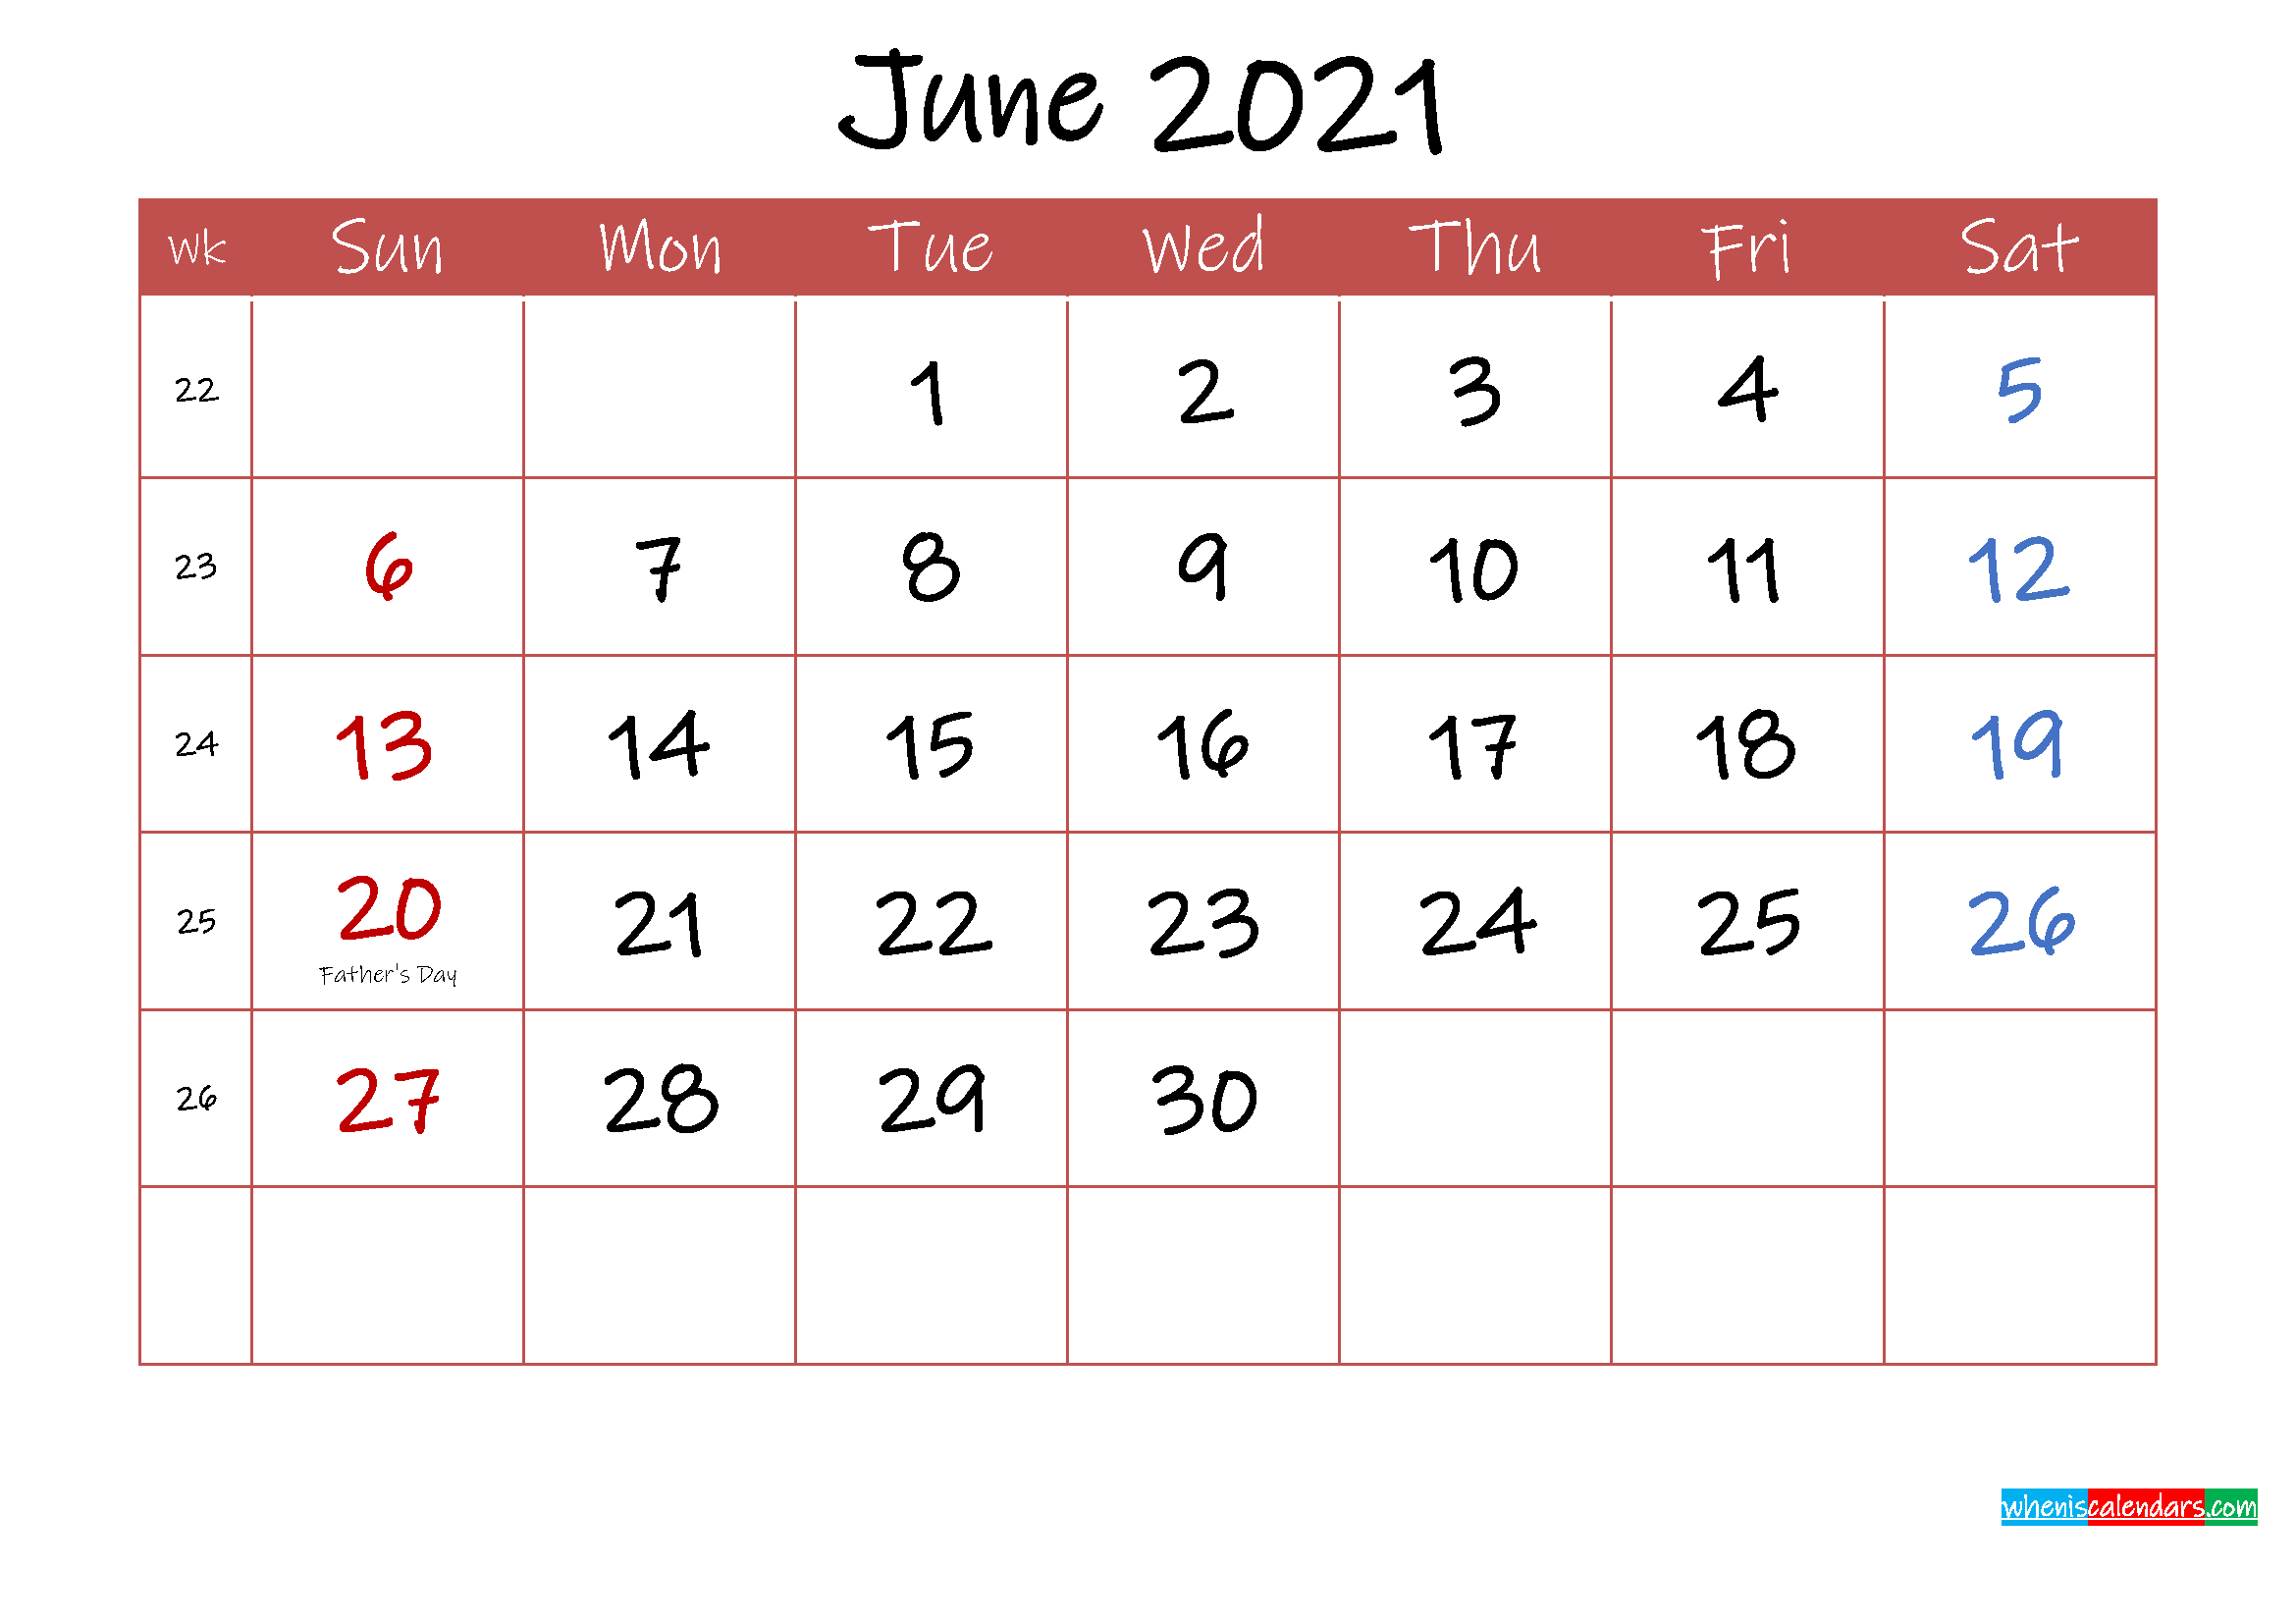 Printable June 2021 Calendar With Holidays - Template-June 2021 Calendar Printable Template